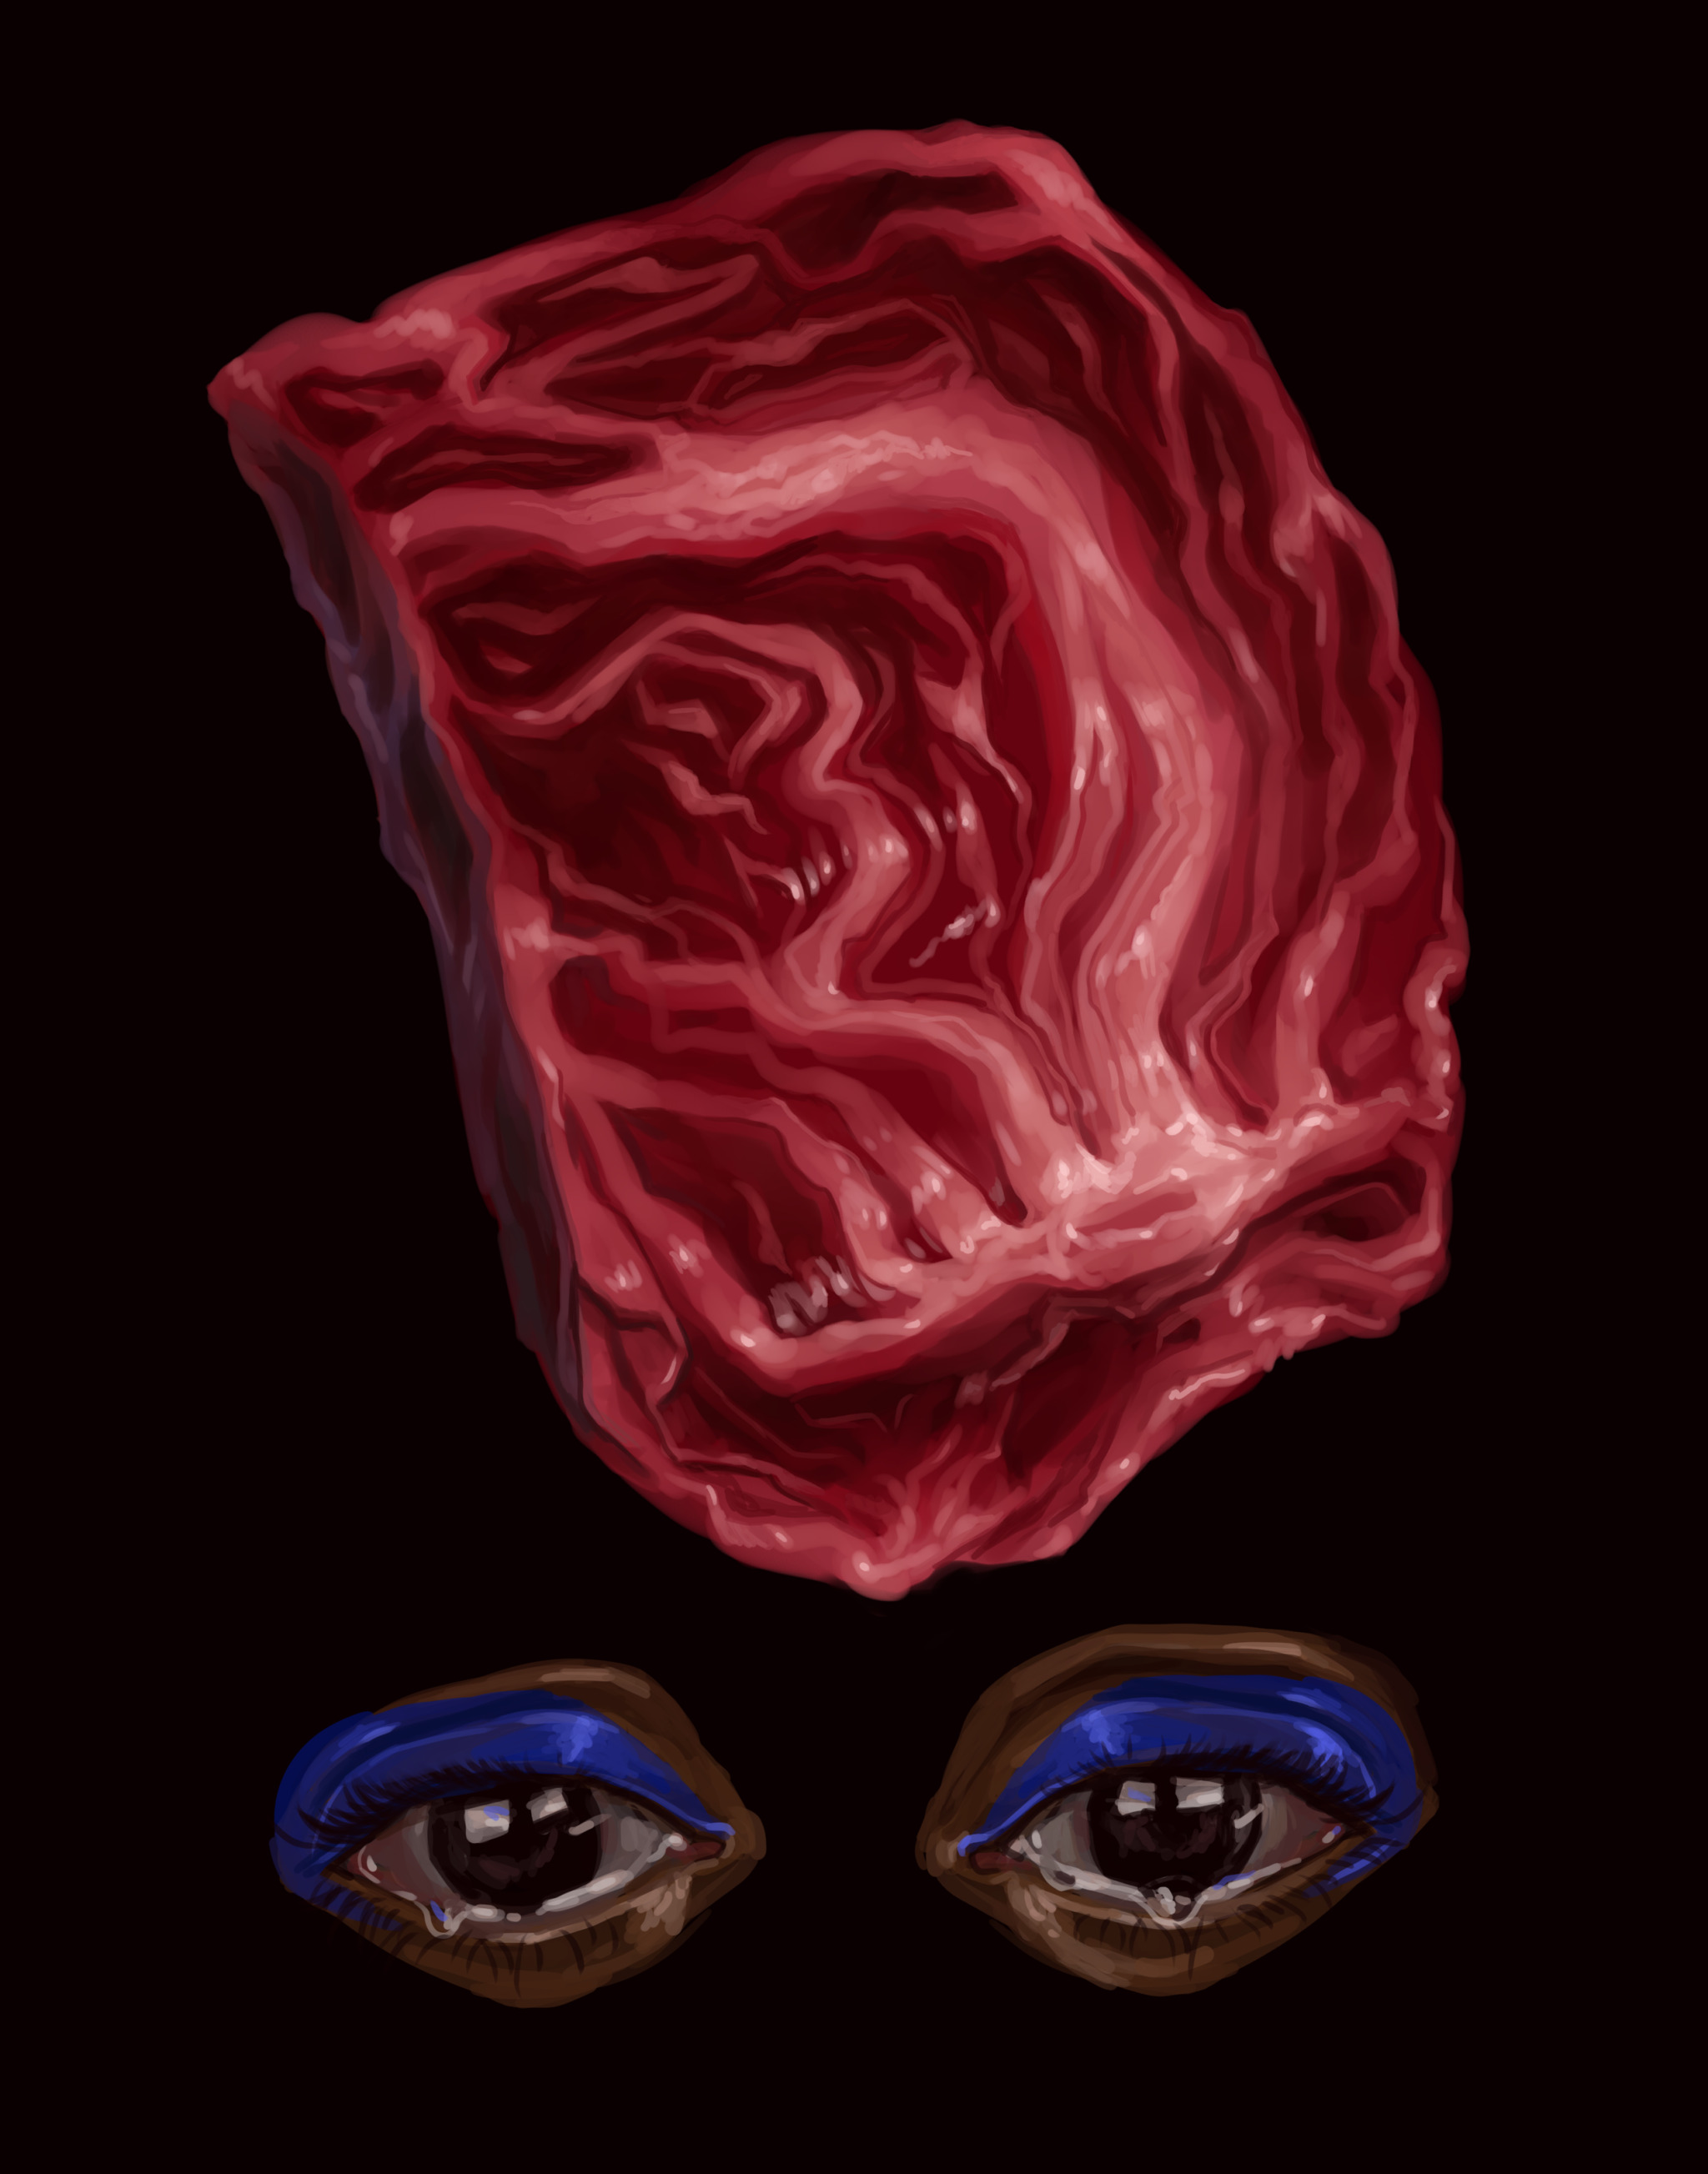 Digital painting of a thick, juicy red meat on a black background, and a pair of eyes floating under it crying.